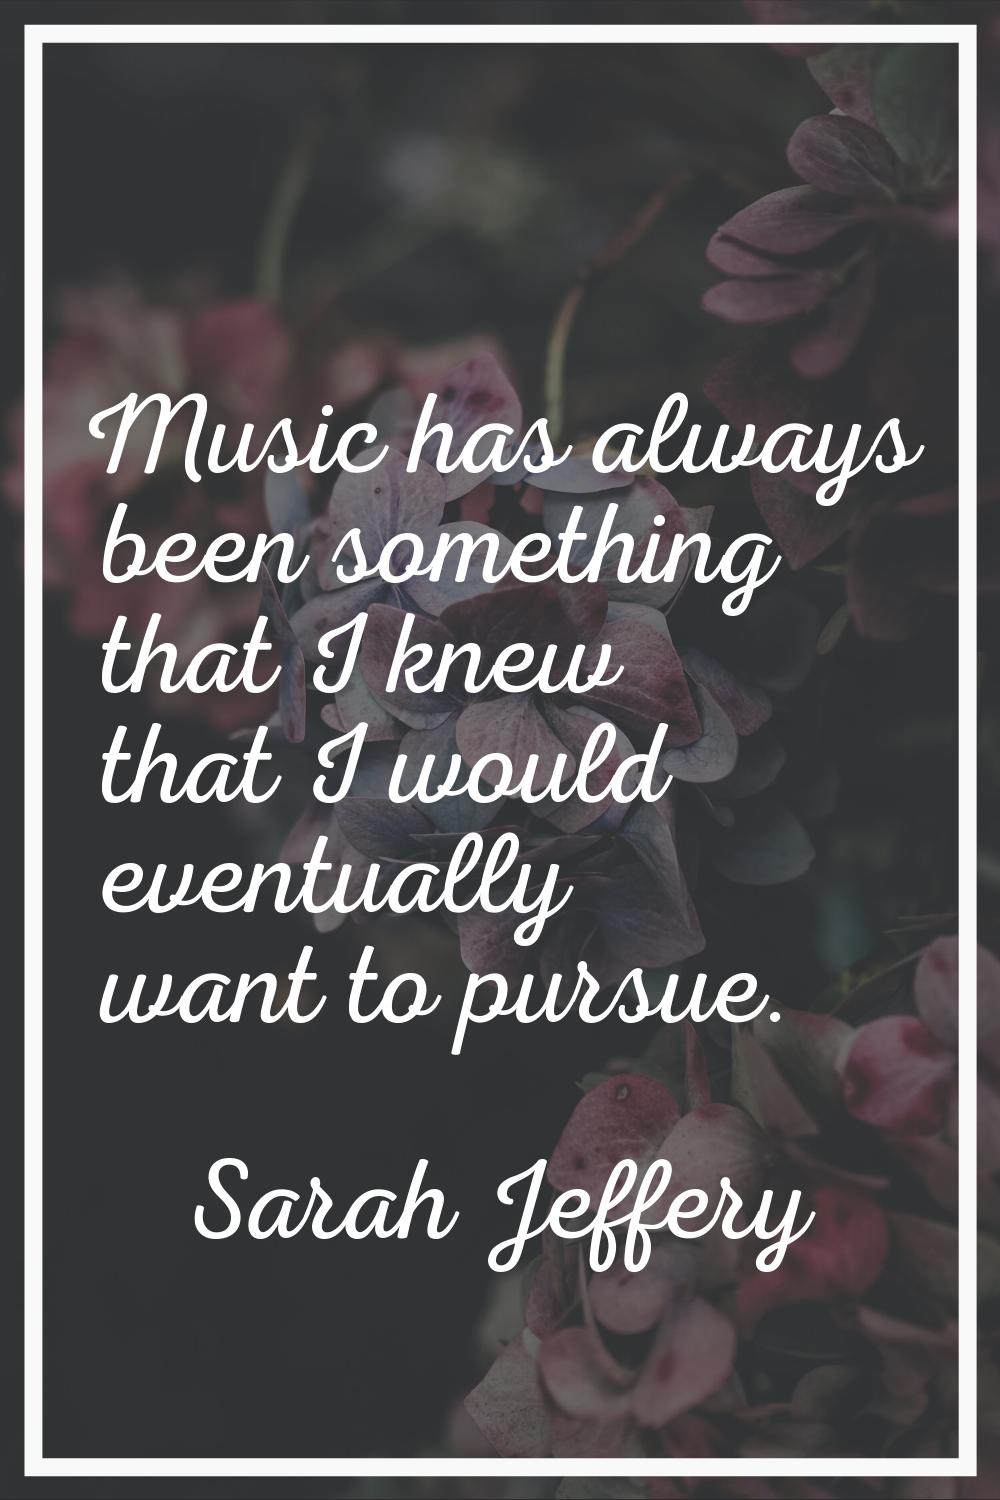 Music has always been something that I knew that I would eventually want to pursue.